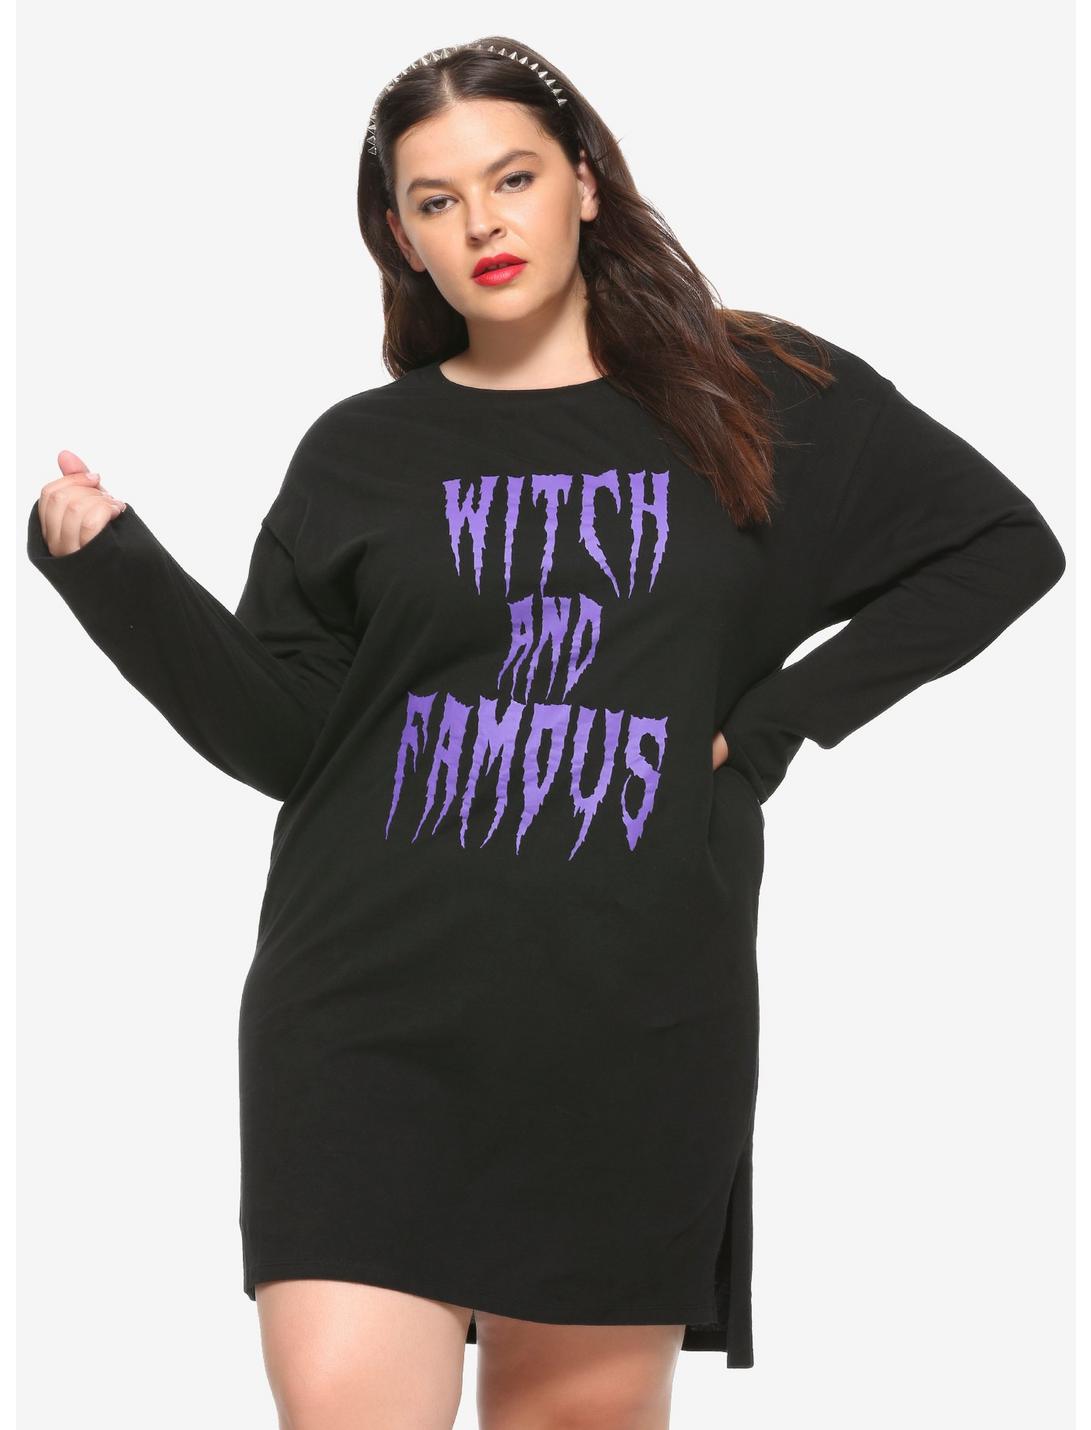 Witch And Famous Long-Sleeve T-Shirt Dress Plus Size, PURPLE, hi-res